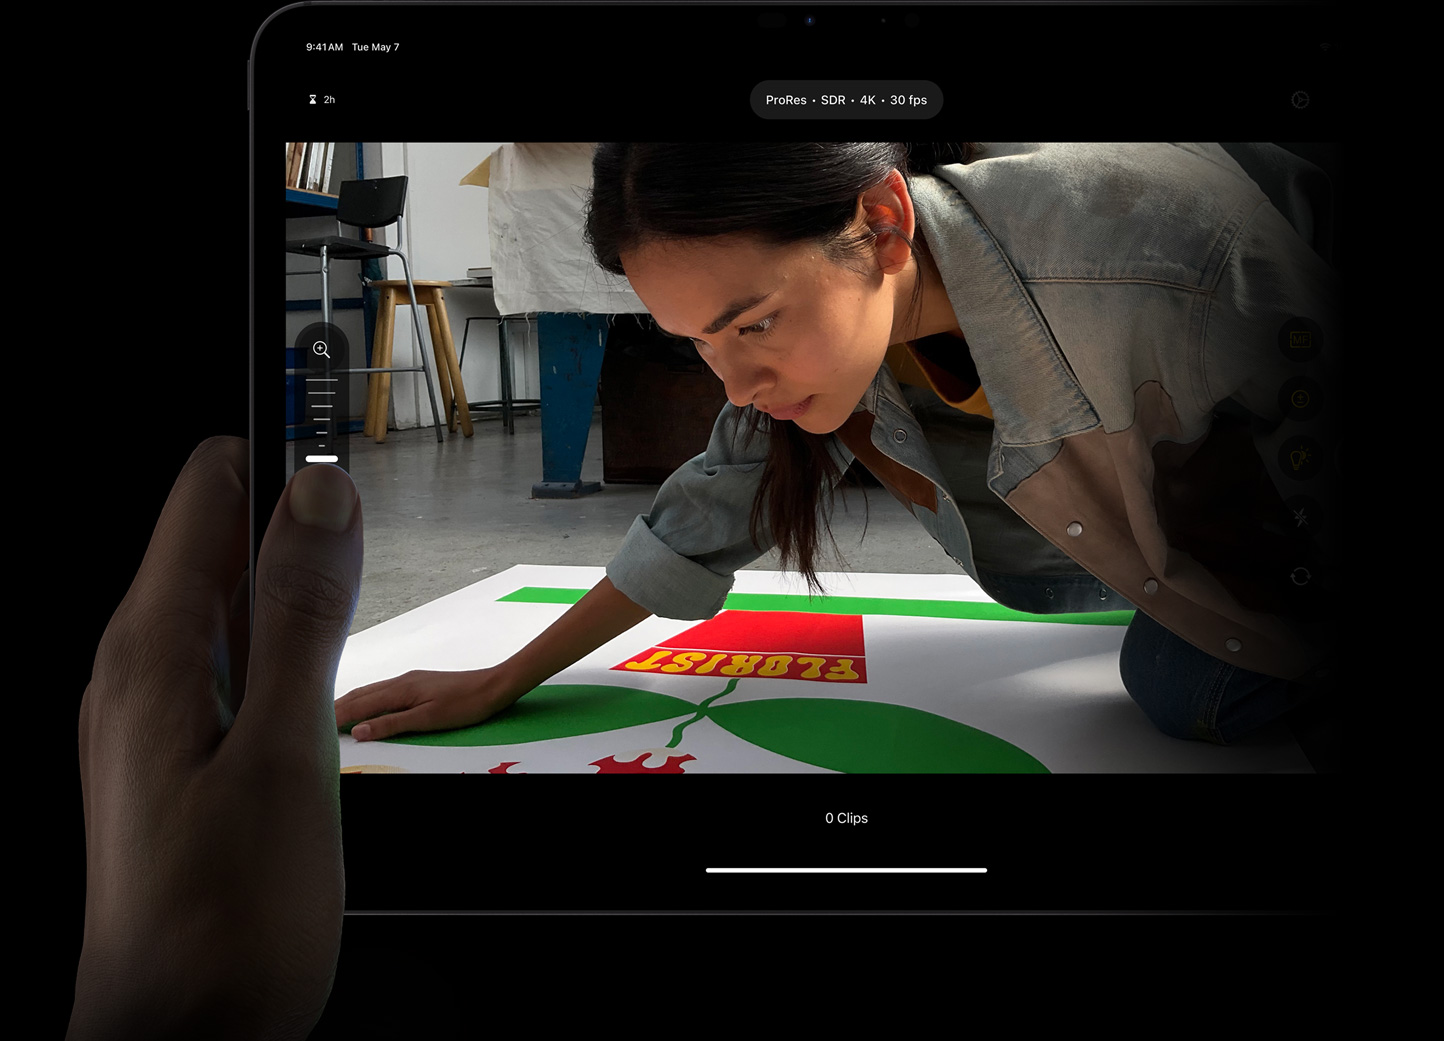 Thumb adjusting focus in ProRes footage using manual pro camera mode controls in Final Cut Pro for iPad on iPad Pro.